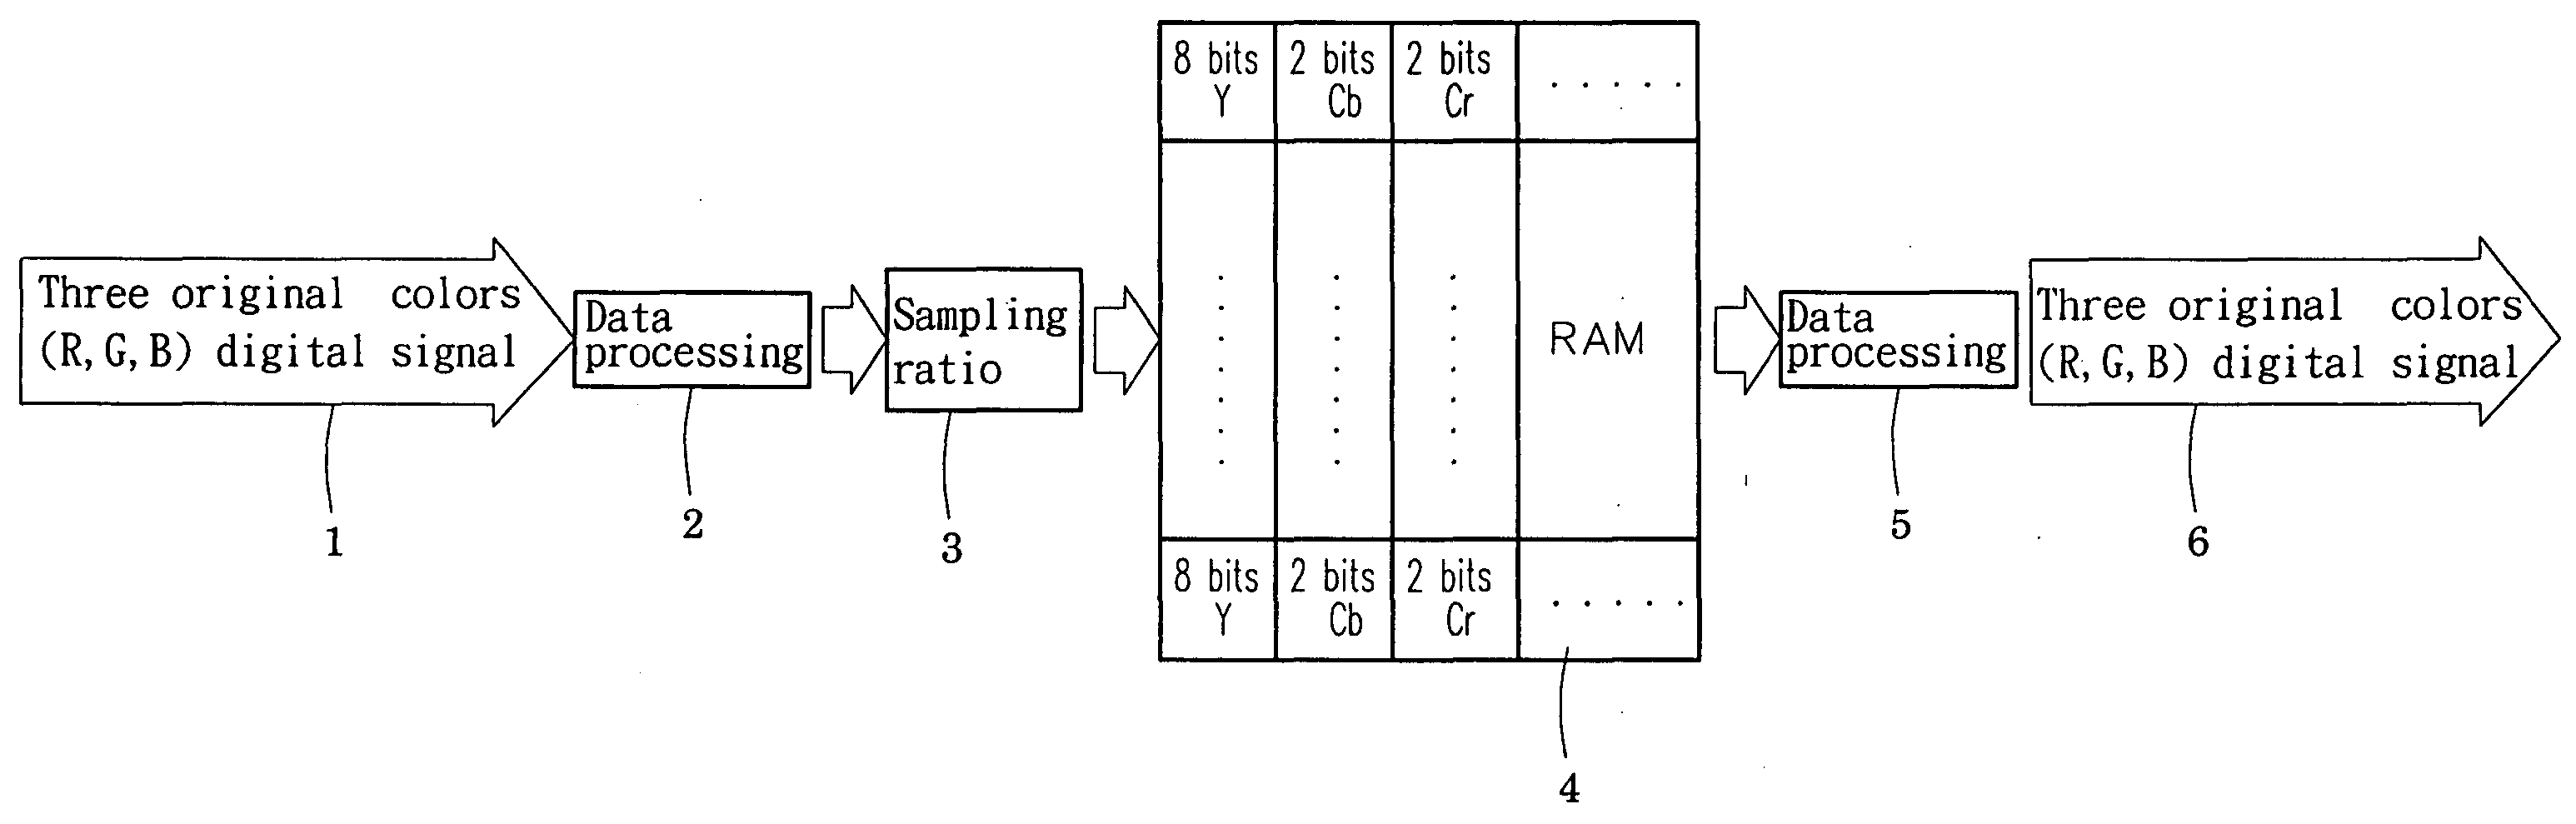 Method for reducing random access memory of IC in display devices